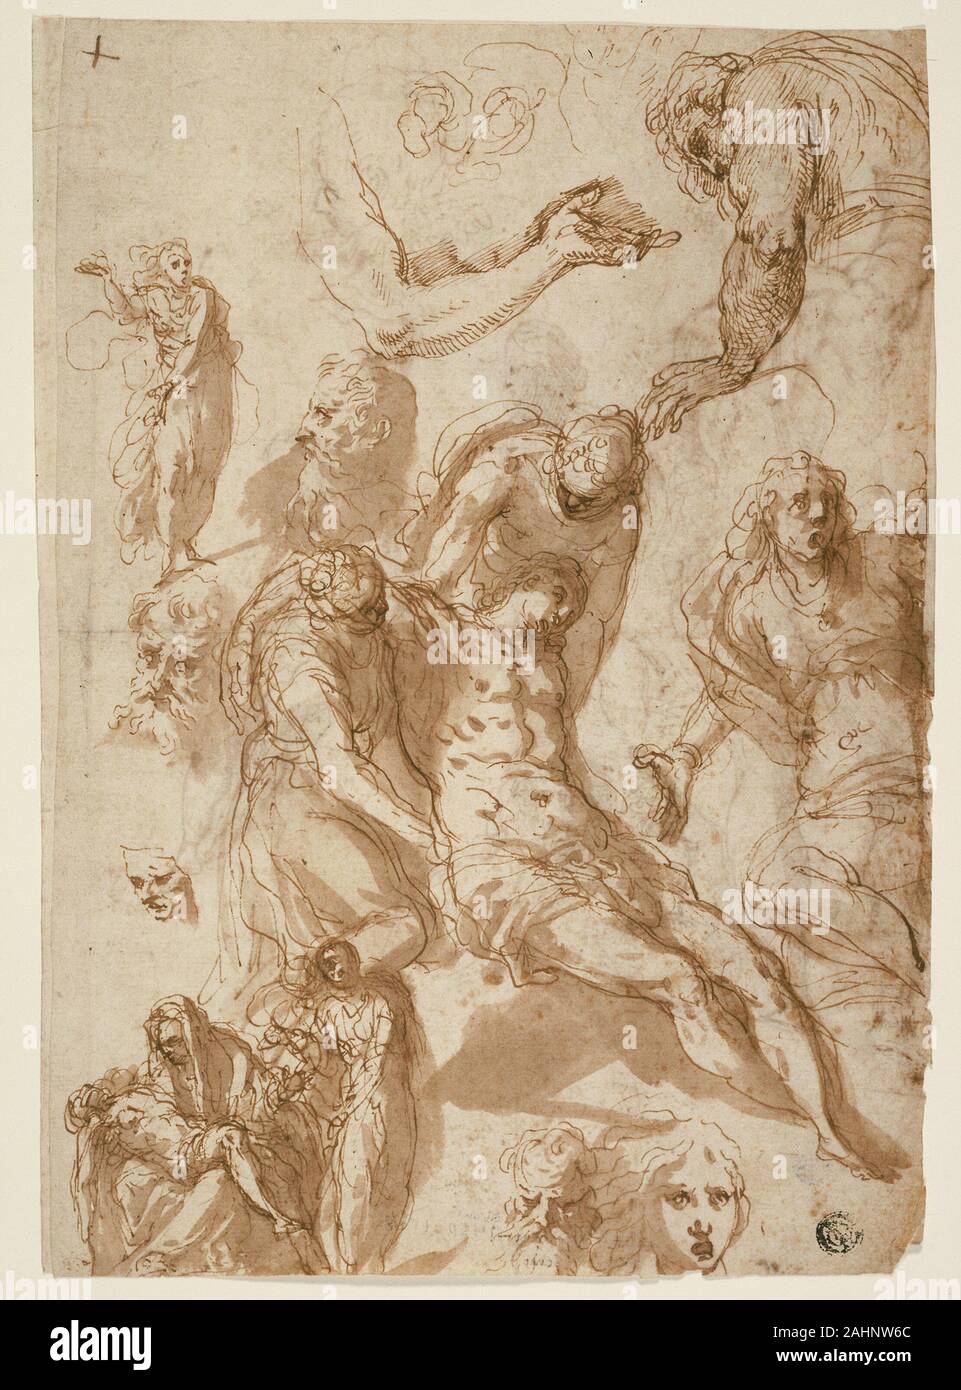 Jacopo Negretti, called Palma il Giovane. Sketches for a Lamentation and a Pietà, and of Various Figures, Heads, and an Arm (recto); Sketches of the Dead Christ, and of Various Figures and Heads (verso). 1575–1585. Italy. Pen and brown ink with brush and brown wash (recto and verso), on ivory laid paper Stock Photo